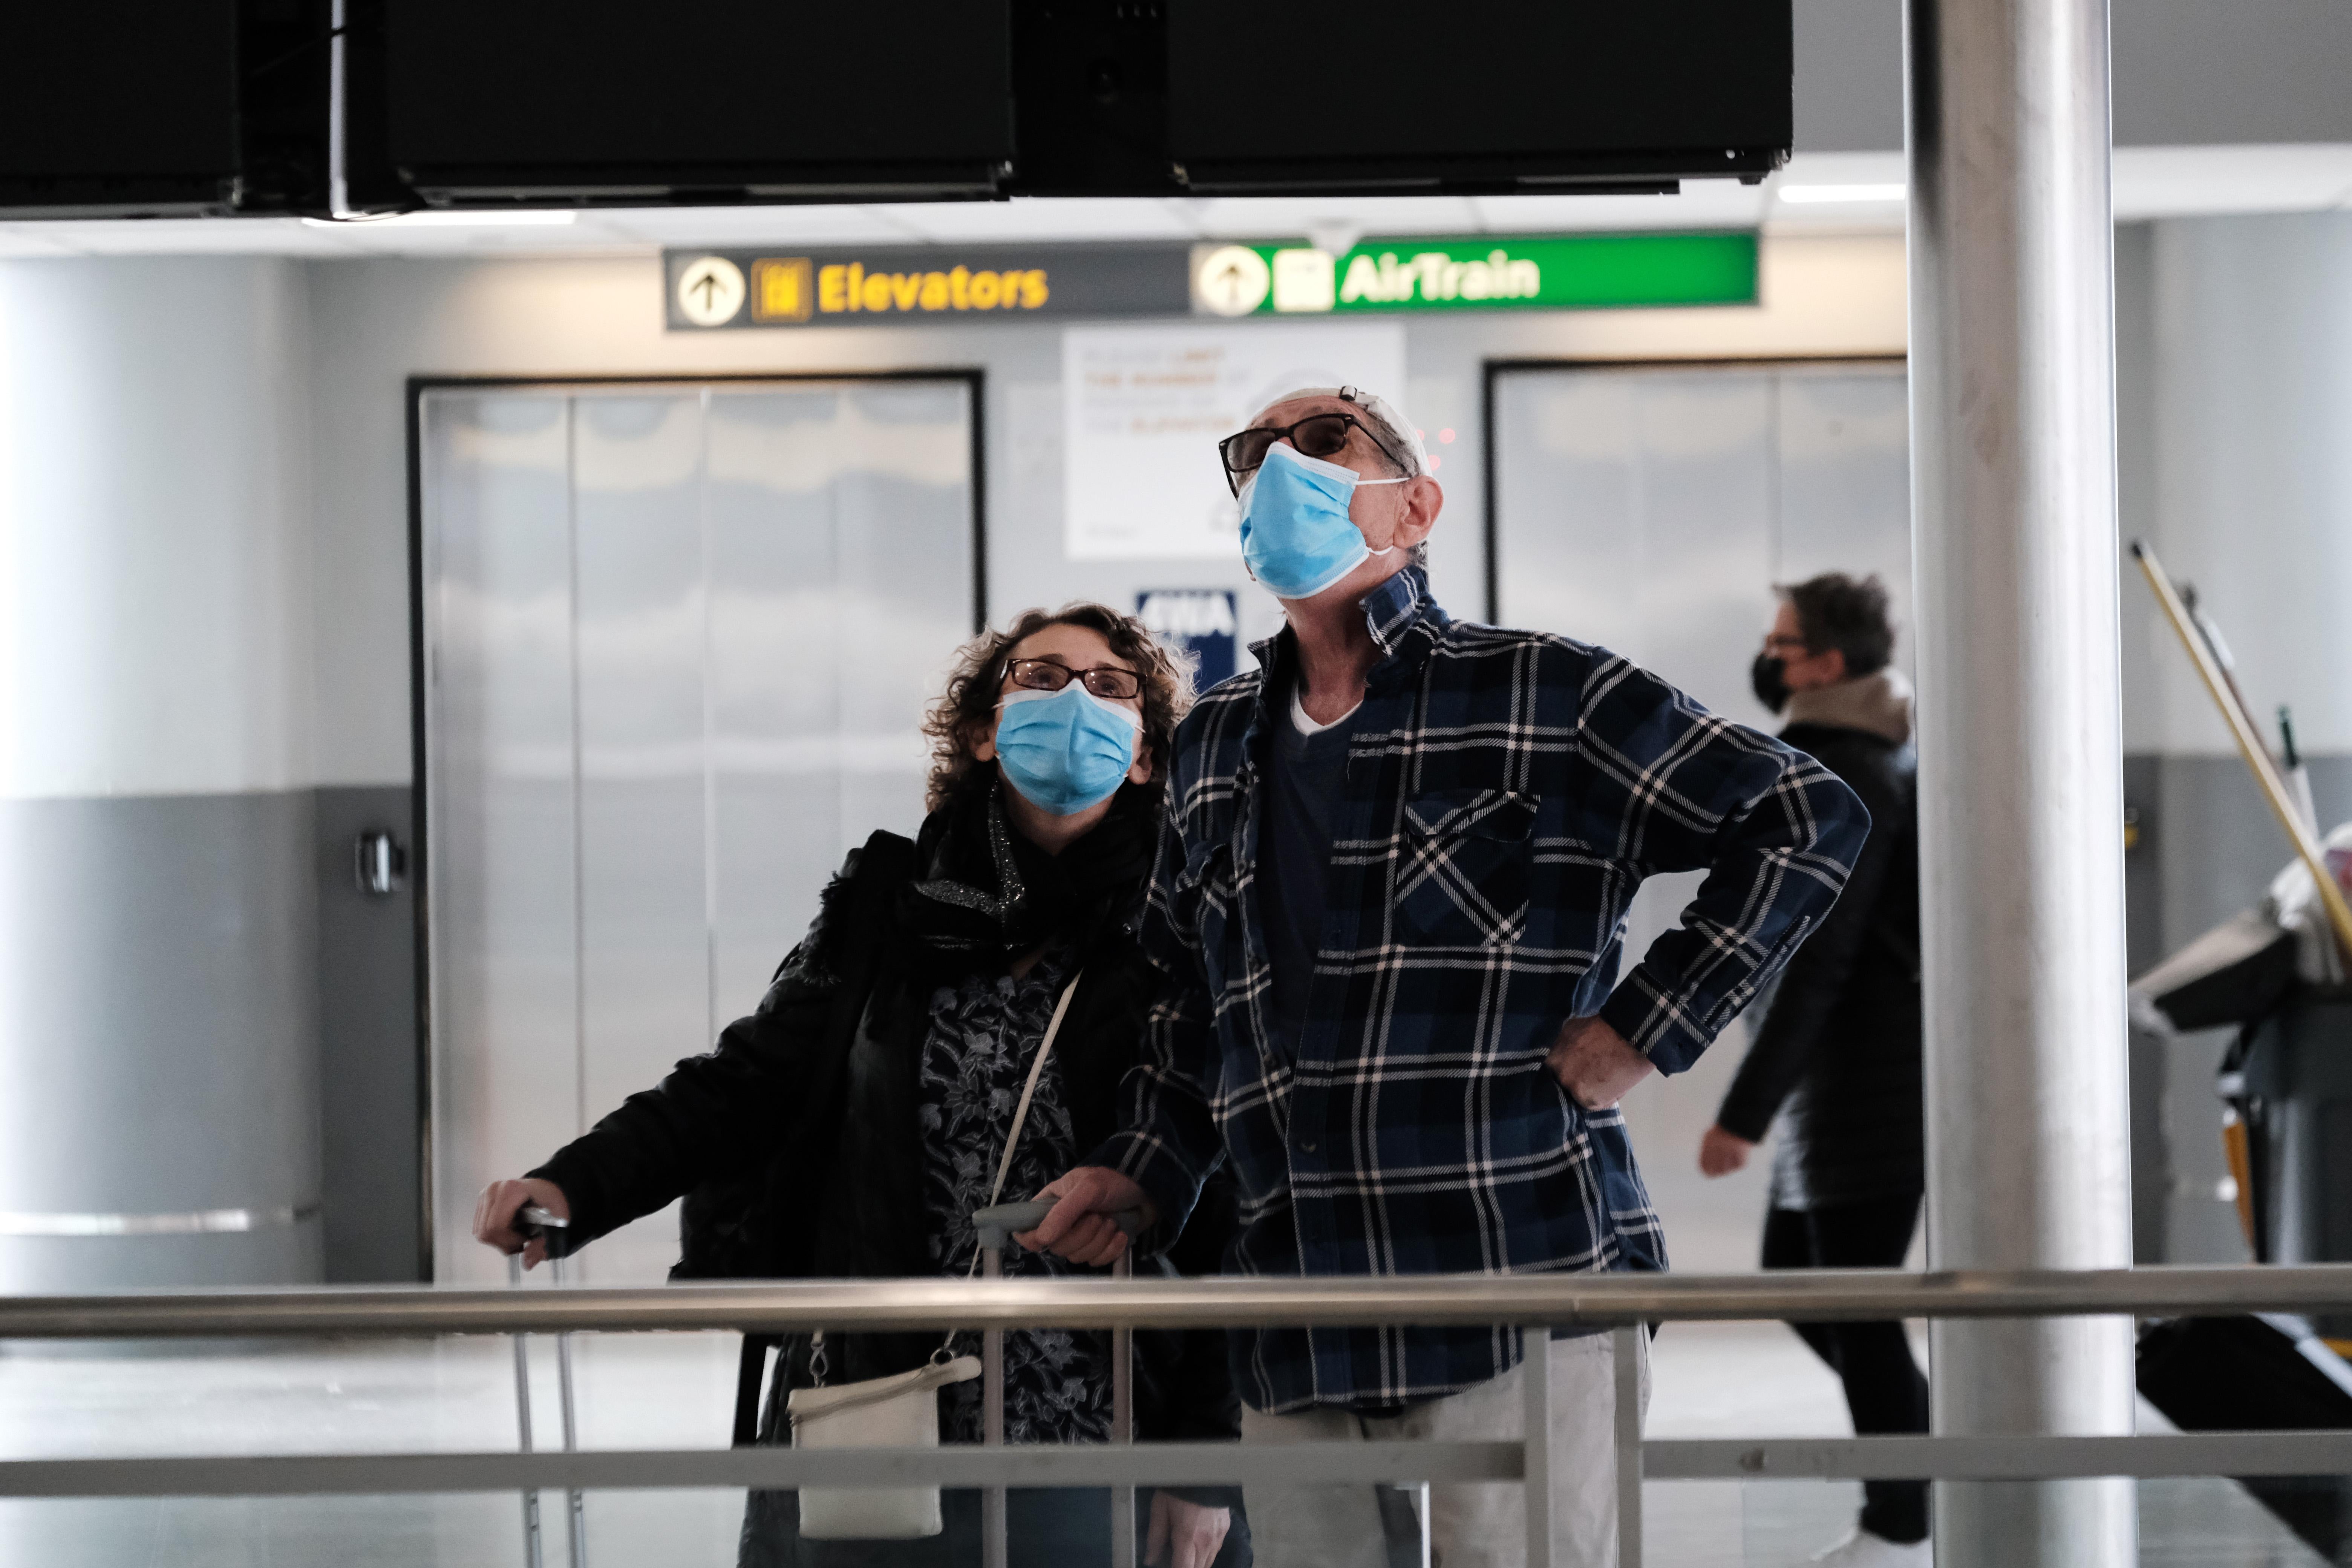 Two people in an airport wearing masks look up at a screen.